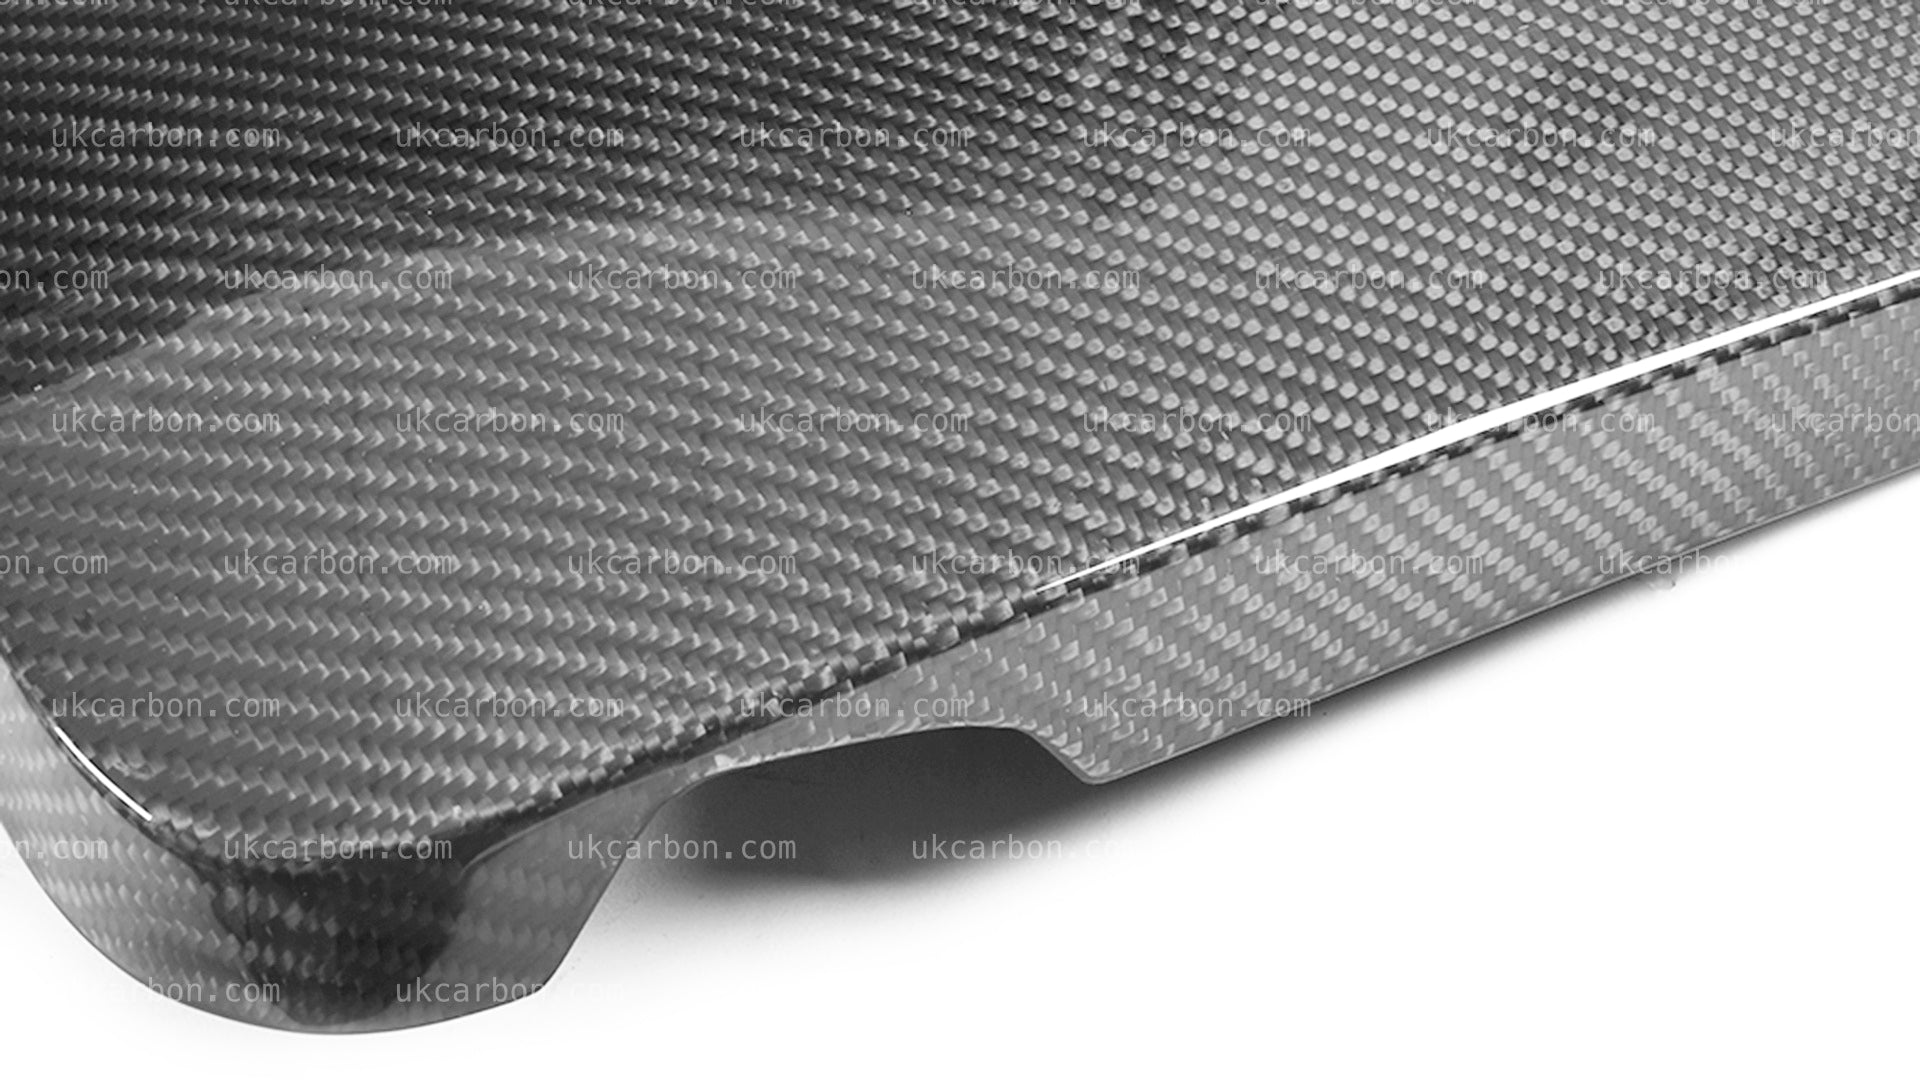 BMW M2 M3 M4 Carbon Fibre Engine Cover Replacement F87 F80 F82 F83 by UKCarbon